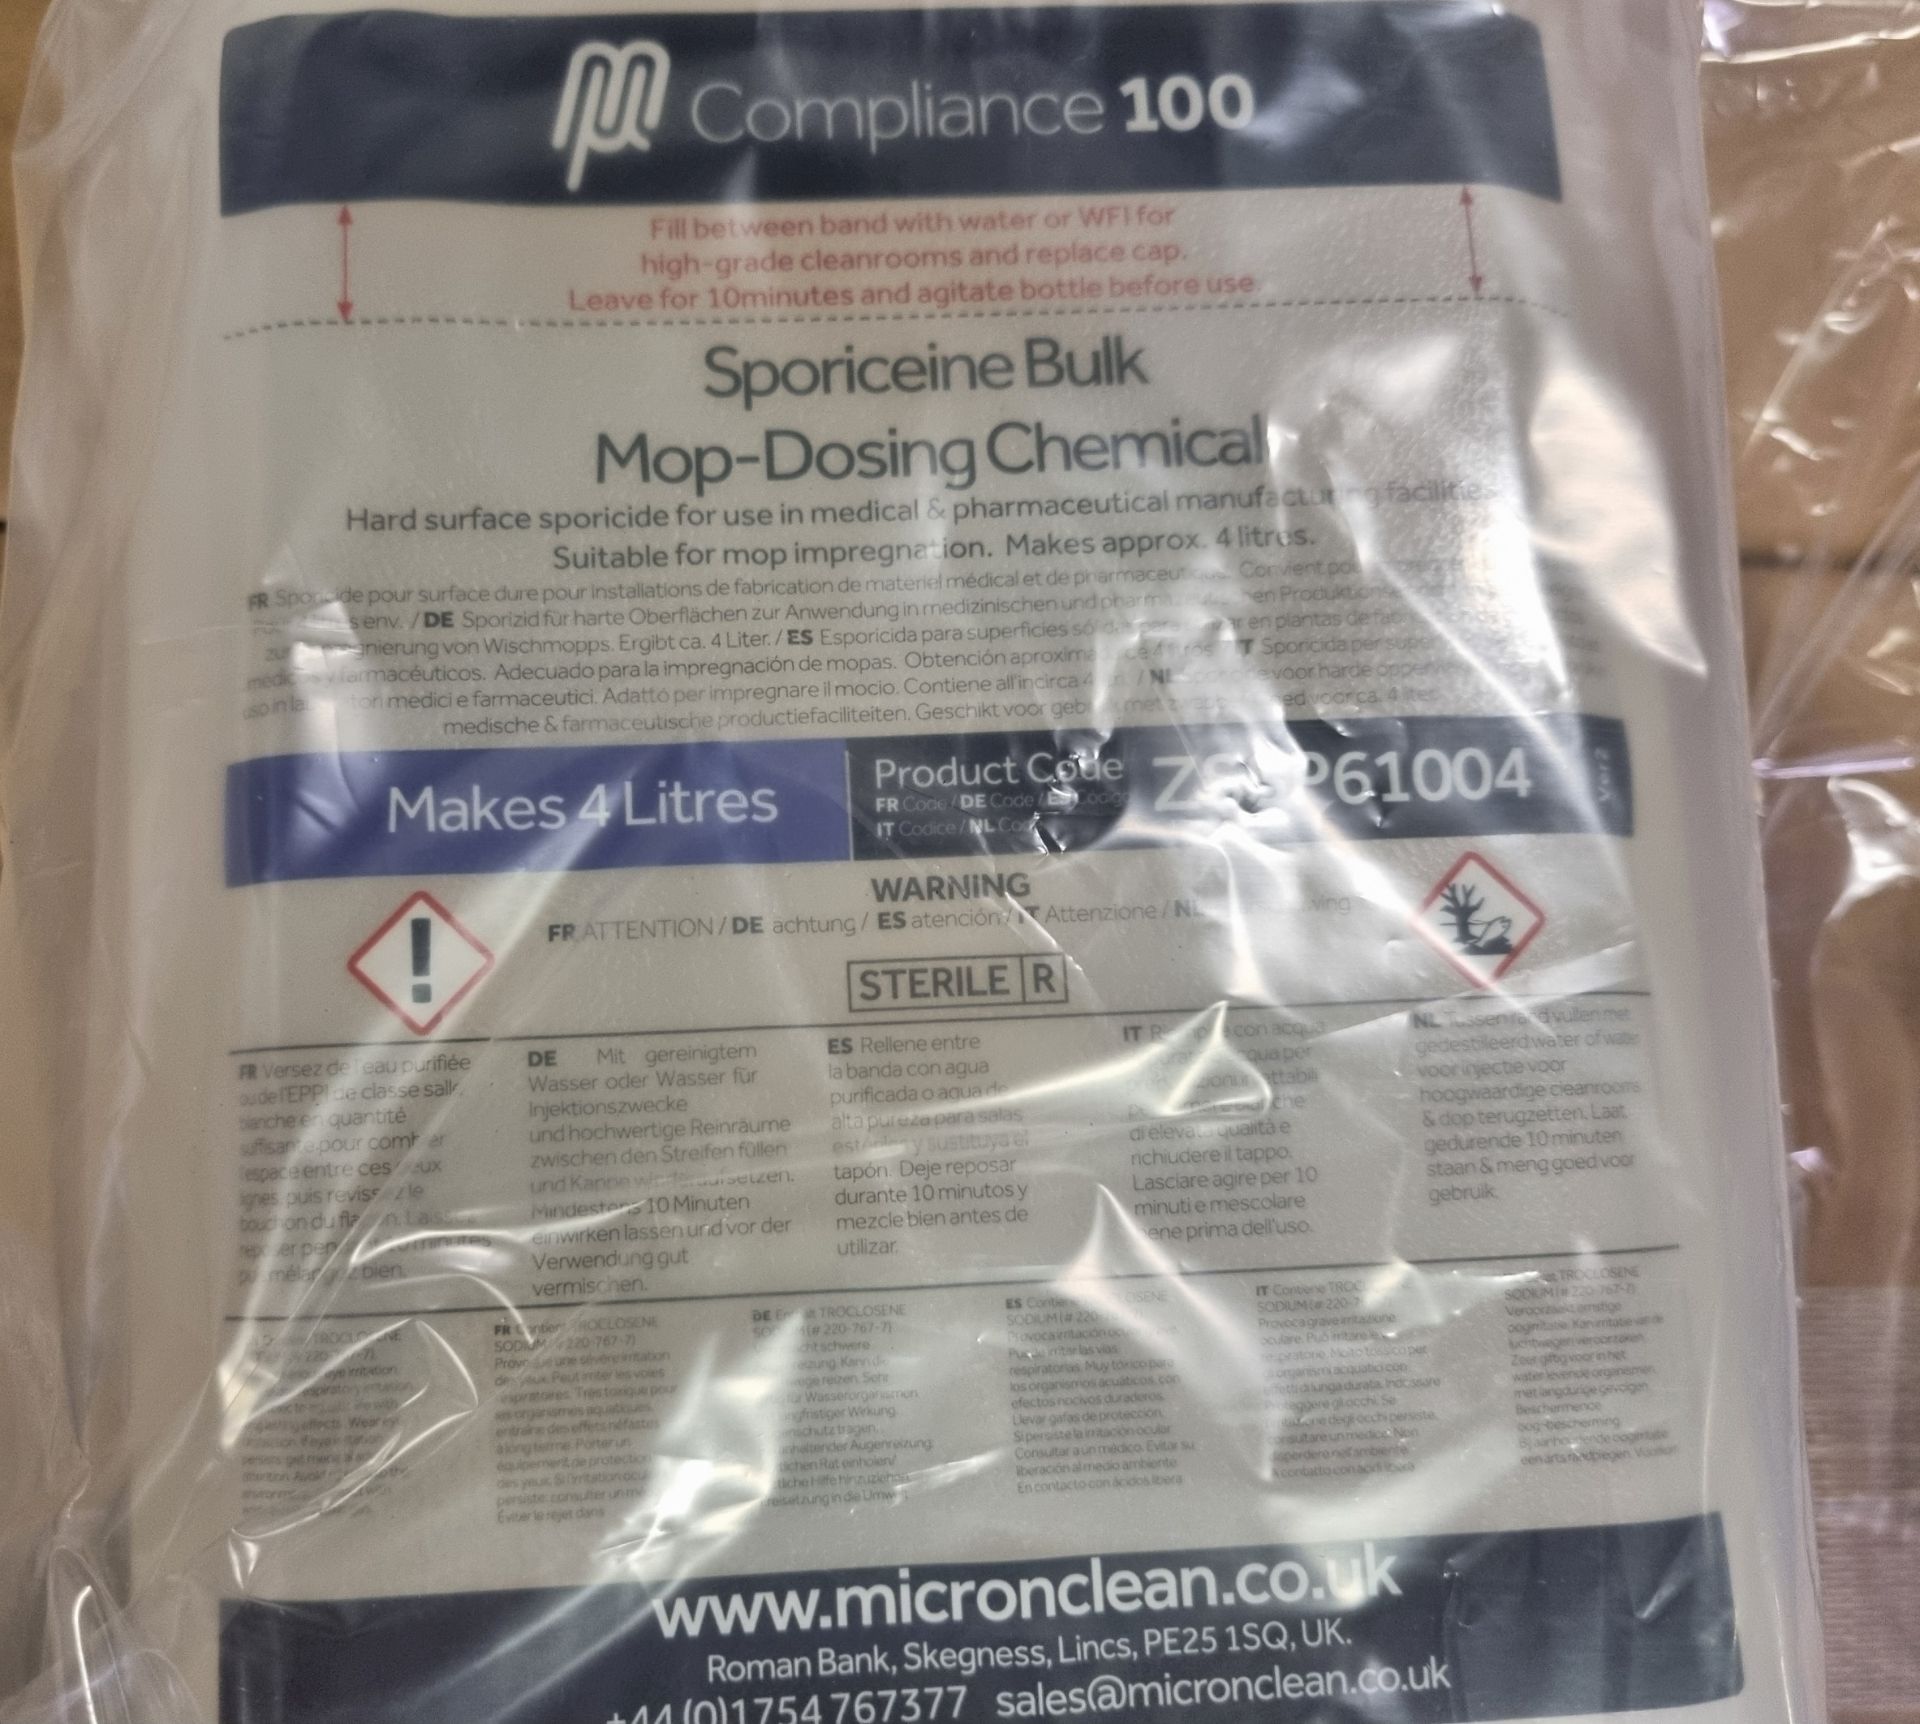 11x boxes of Sporiceine ZSSP61004 mop-dosing chemical - 9 bottles x 4 litre per box - Image 2 of 4